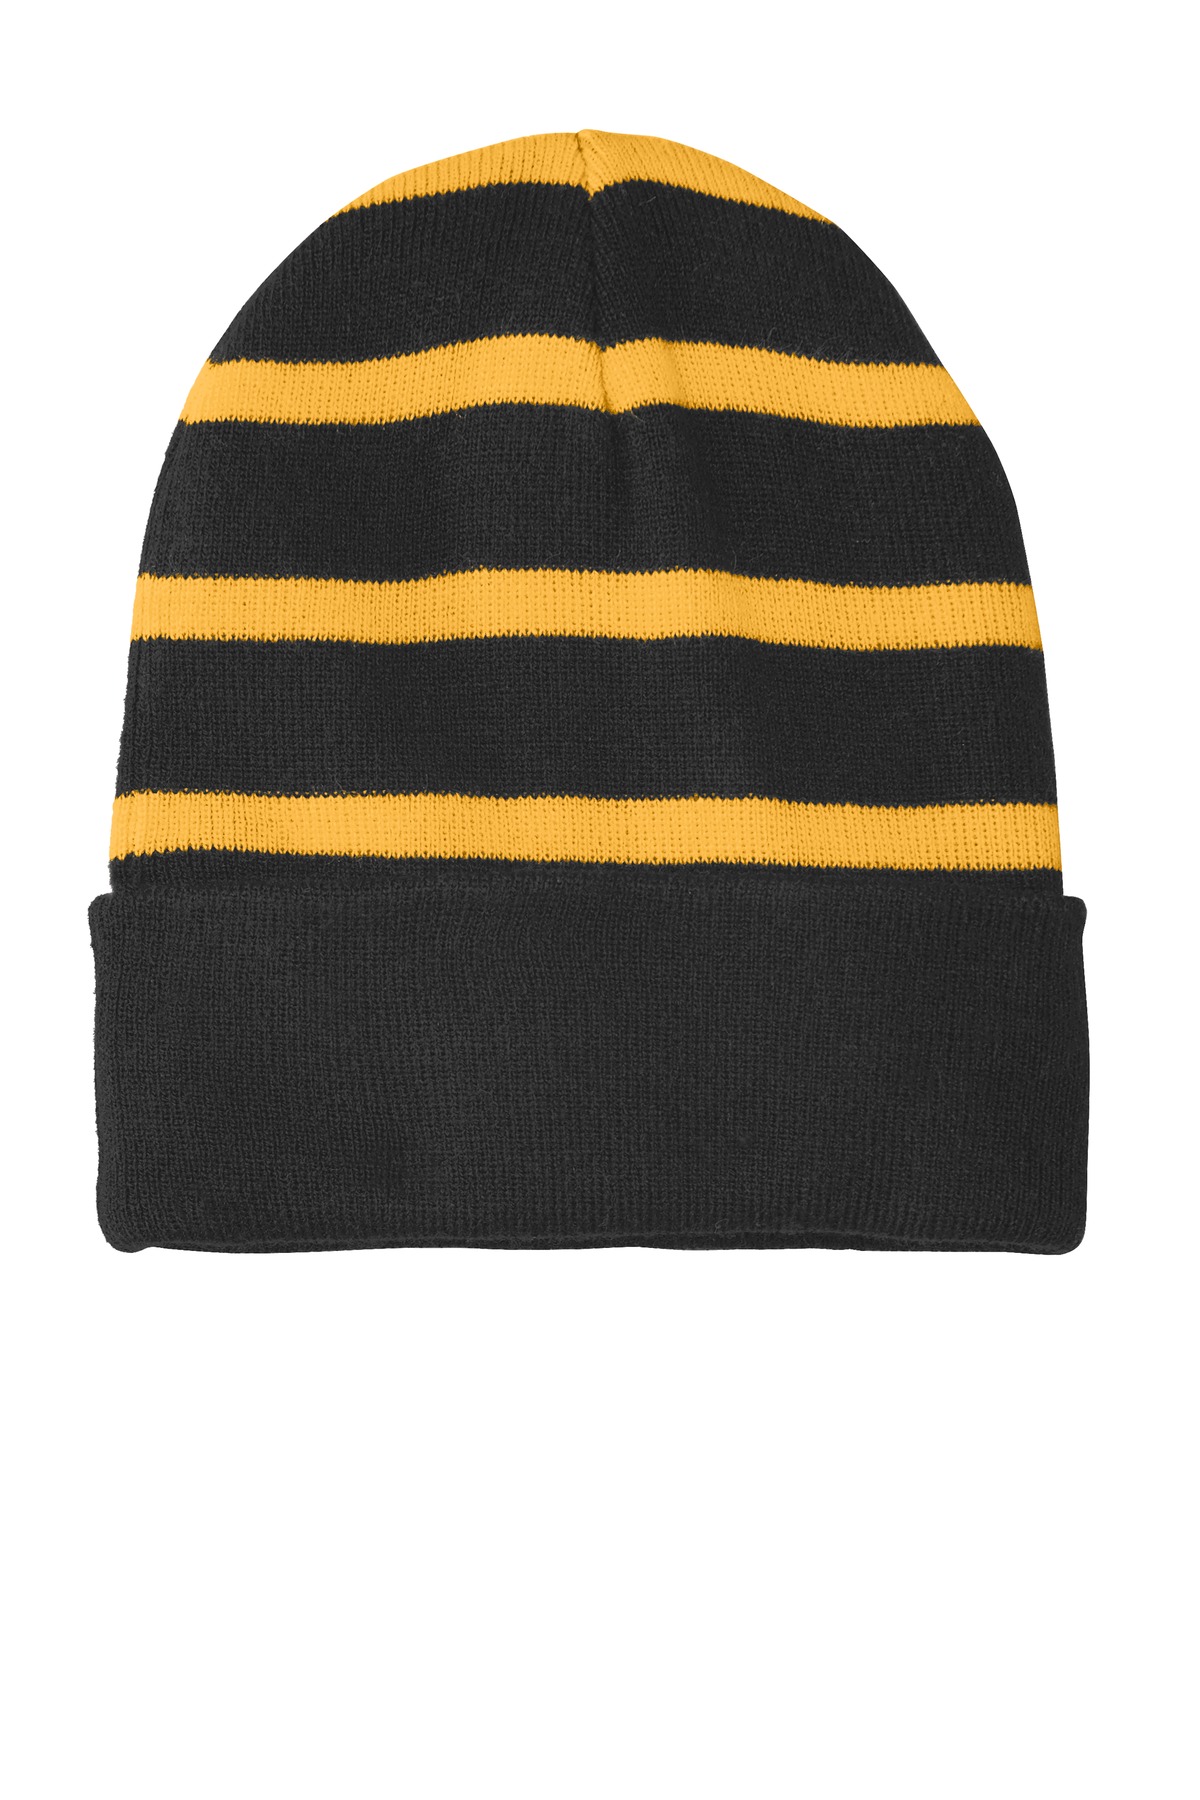 Sport-Tek Striped Beanie with Solid Band - STC31